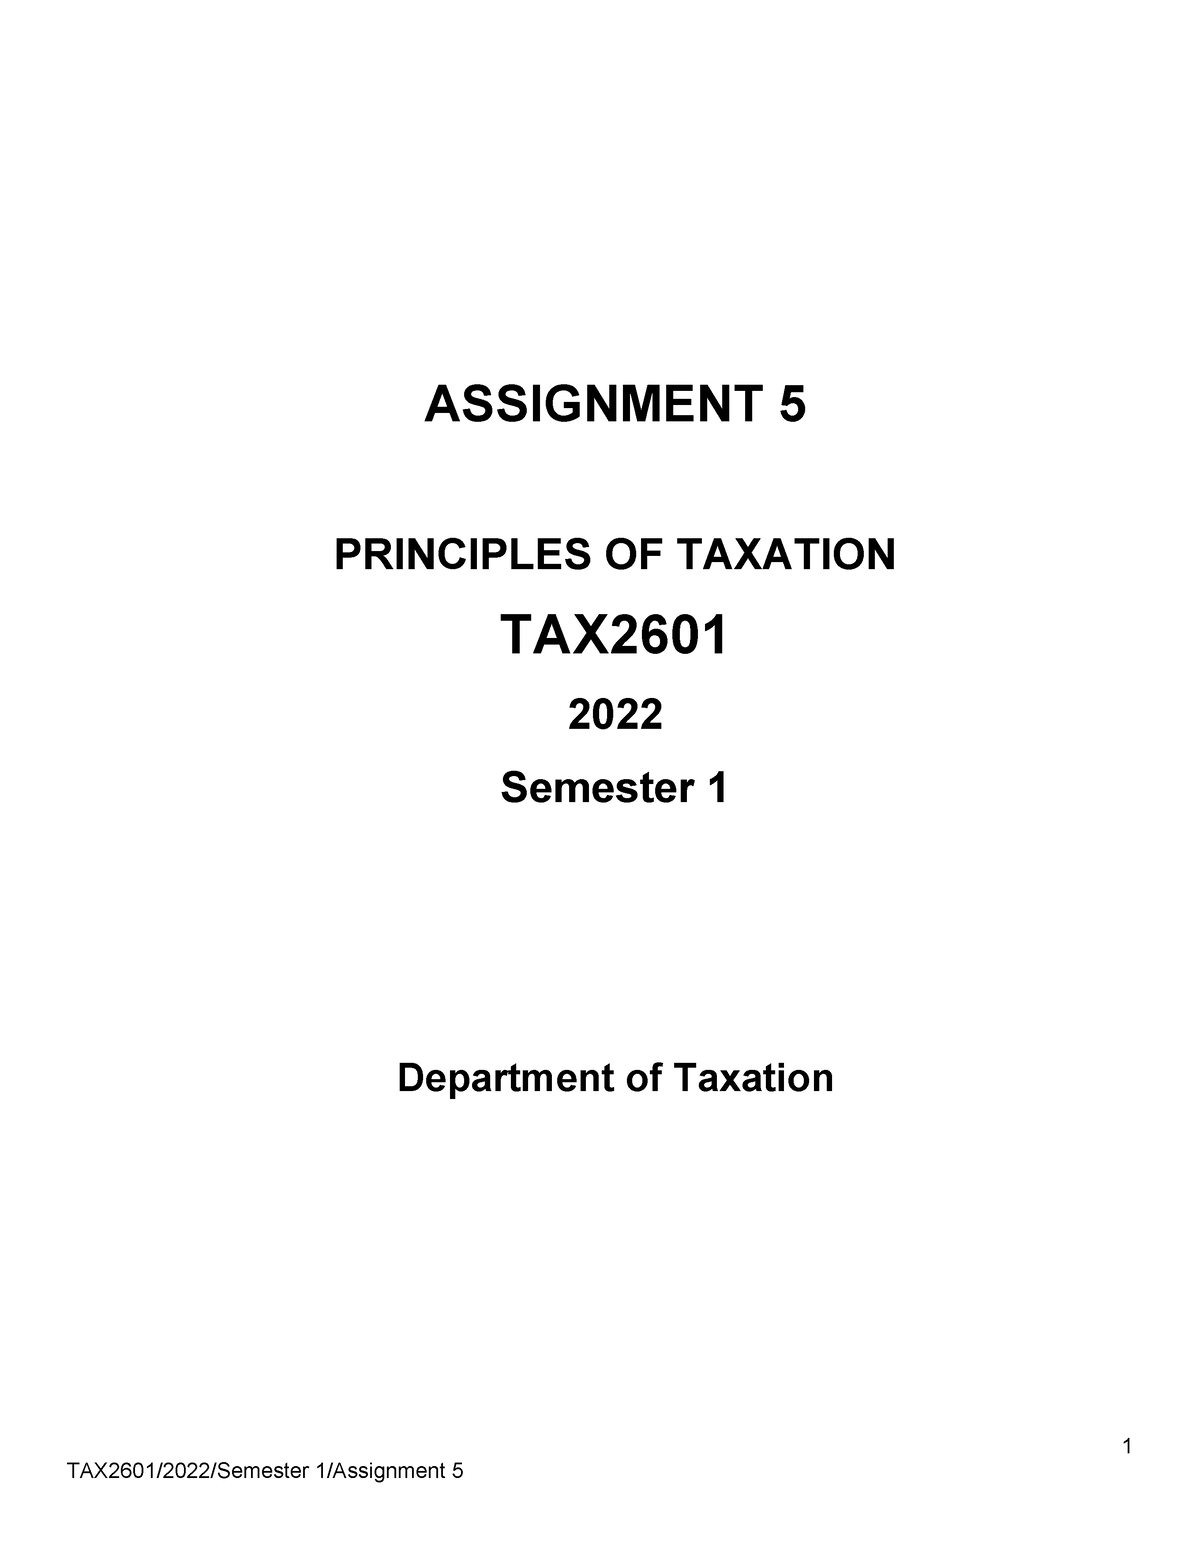 tax2601 assignment 5 answers